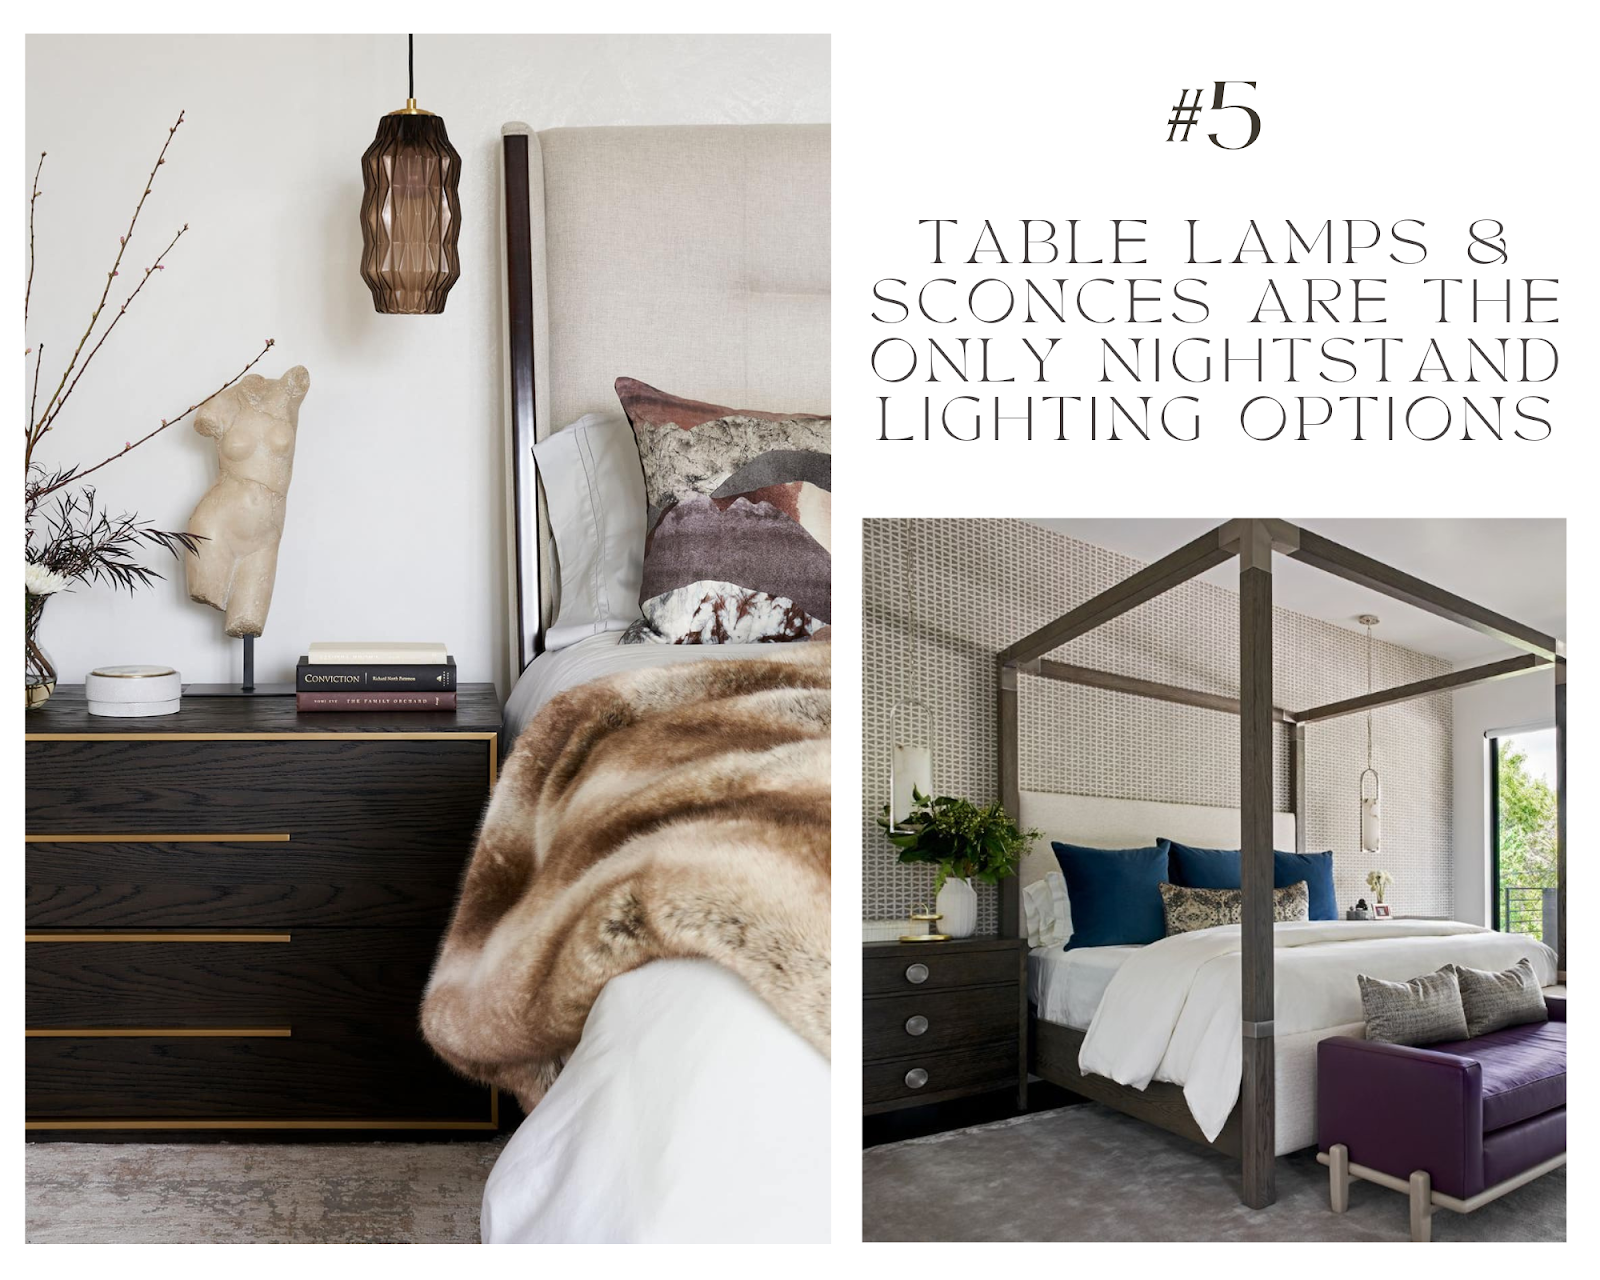 Another Myth: table lamps and sconces are your only nightstand options